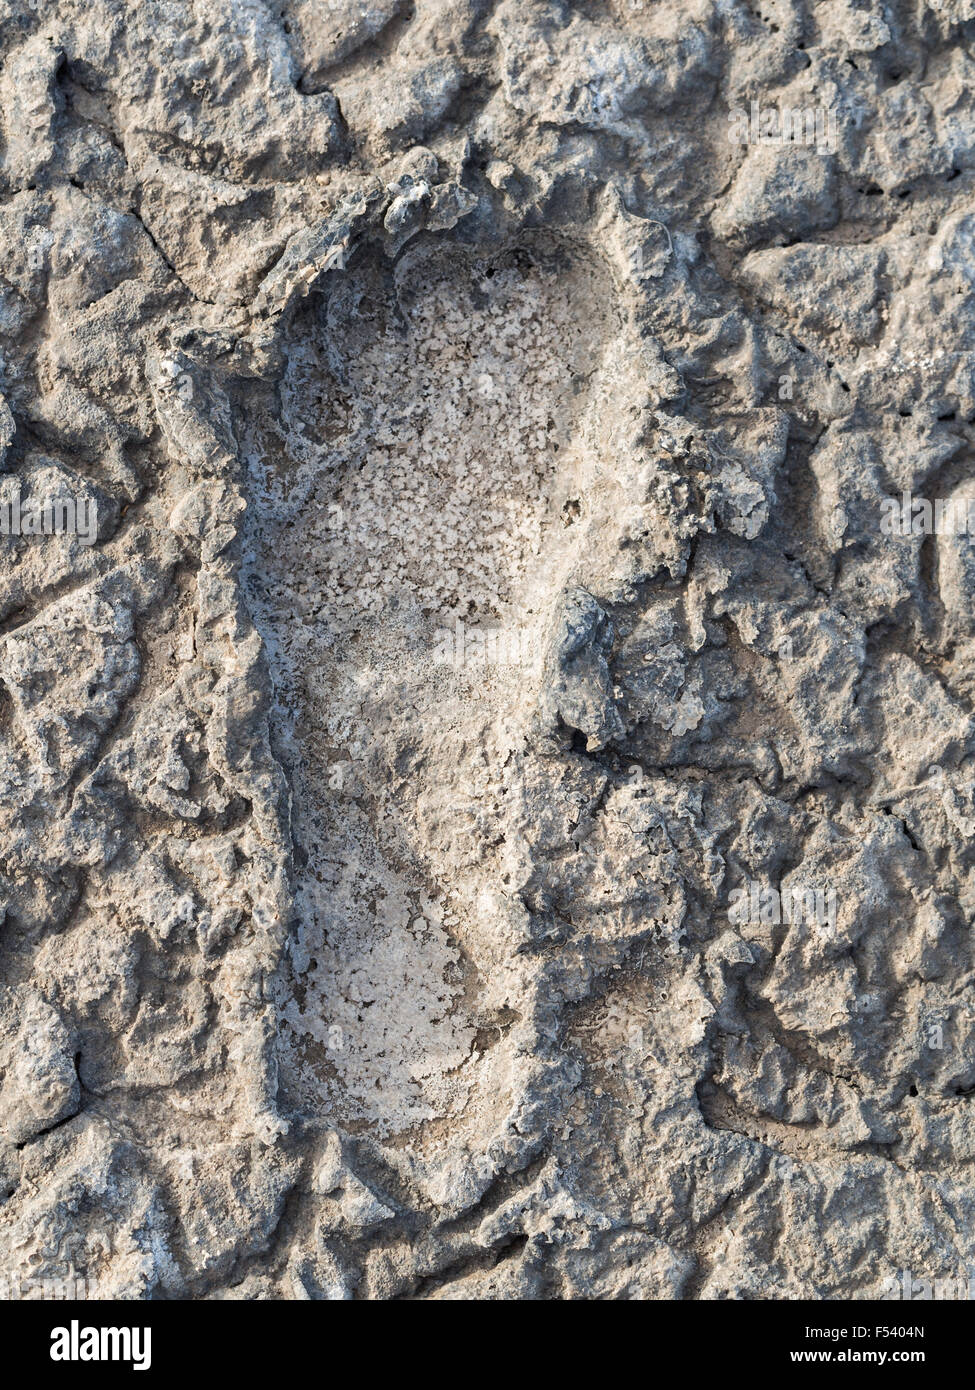 A footprint in the dry volcanic ground in the dried part of Lake Natron in Northen Tanzania, Africa. Stock Photo